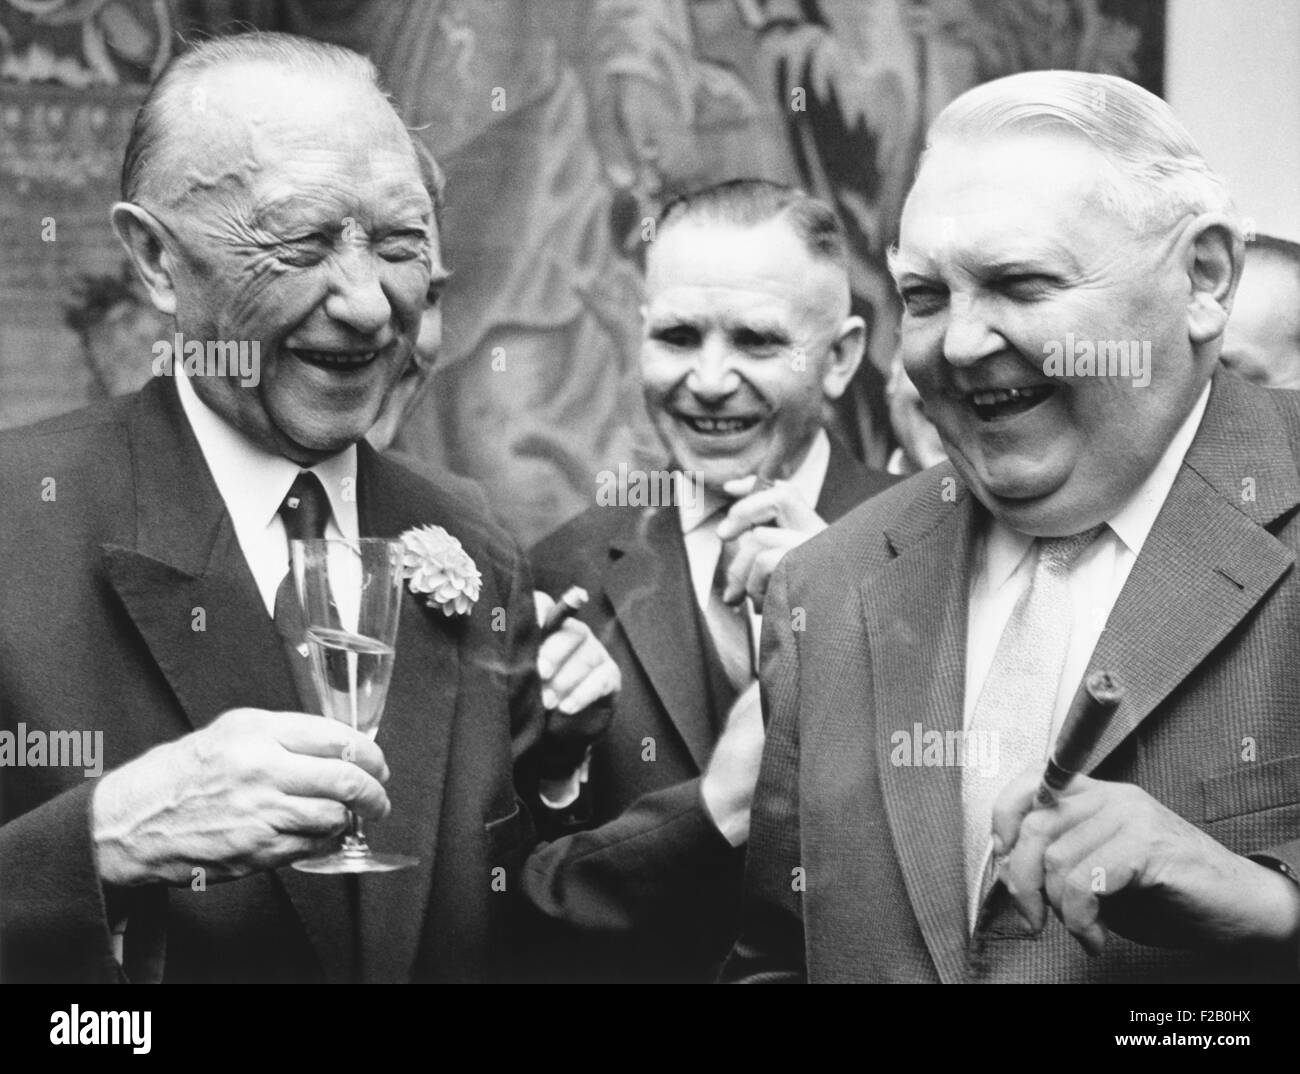 West German Chancellor Konrad Adenauer (left), and Chancellor designate Ludwig Erhard. Sept. 25, 1963. They were attending Adenauer's retirement party at the Chancellery 'Palace Schaumburg' in Bonn, West Germany. (CSU 2015 9 1097) Stock Photo